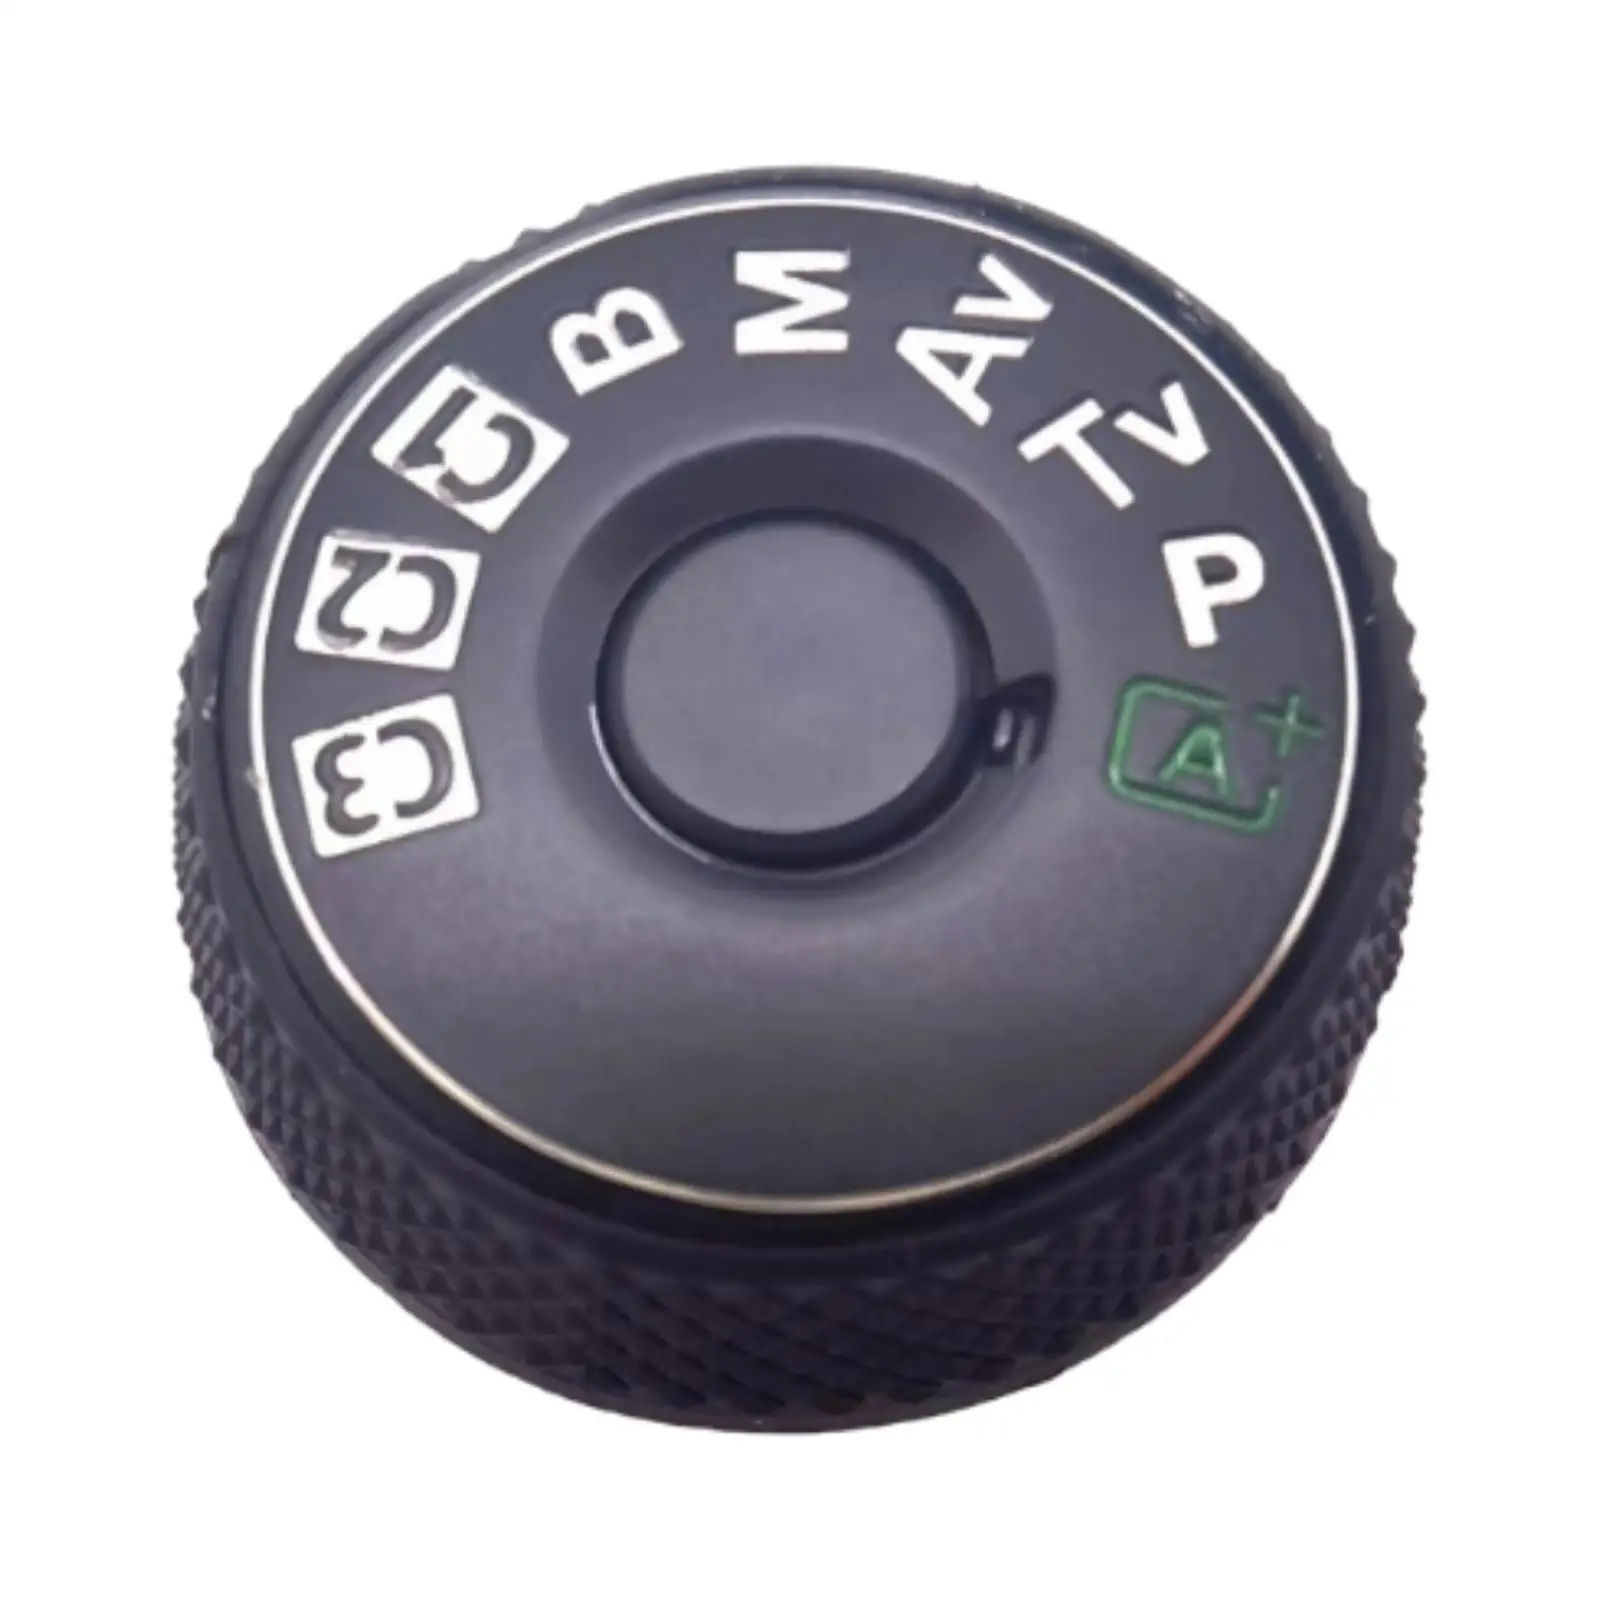 Top Cover Function Dial Model Button Label Digital Camera Repair Part for Canon 5D4 Easy Installation Durable High Reliability